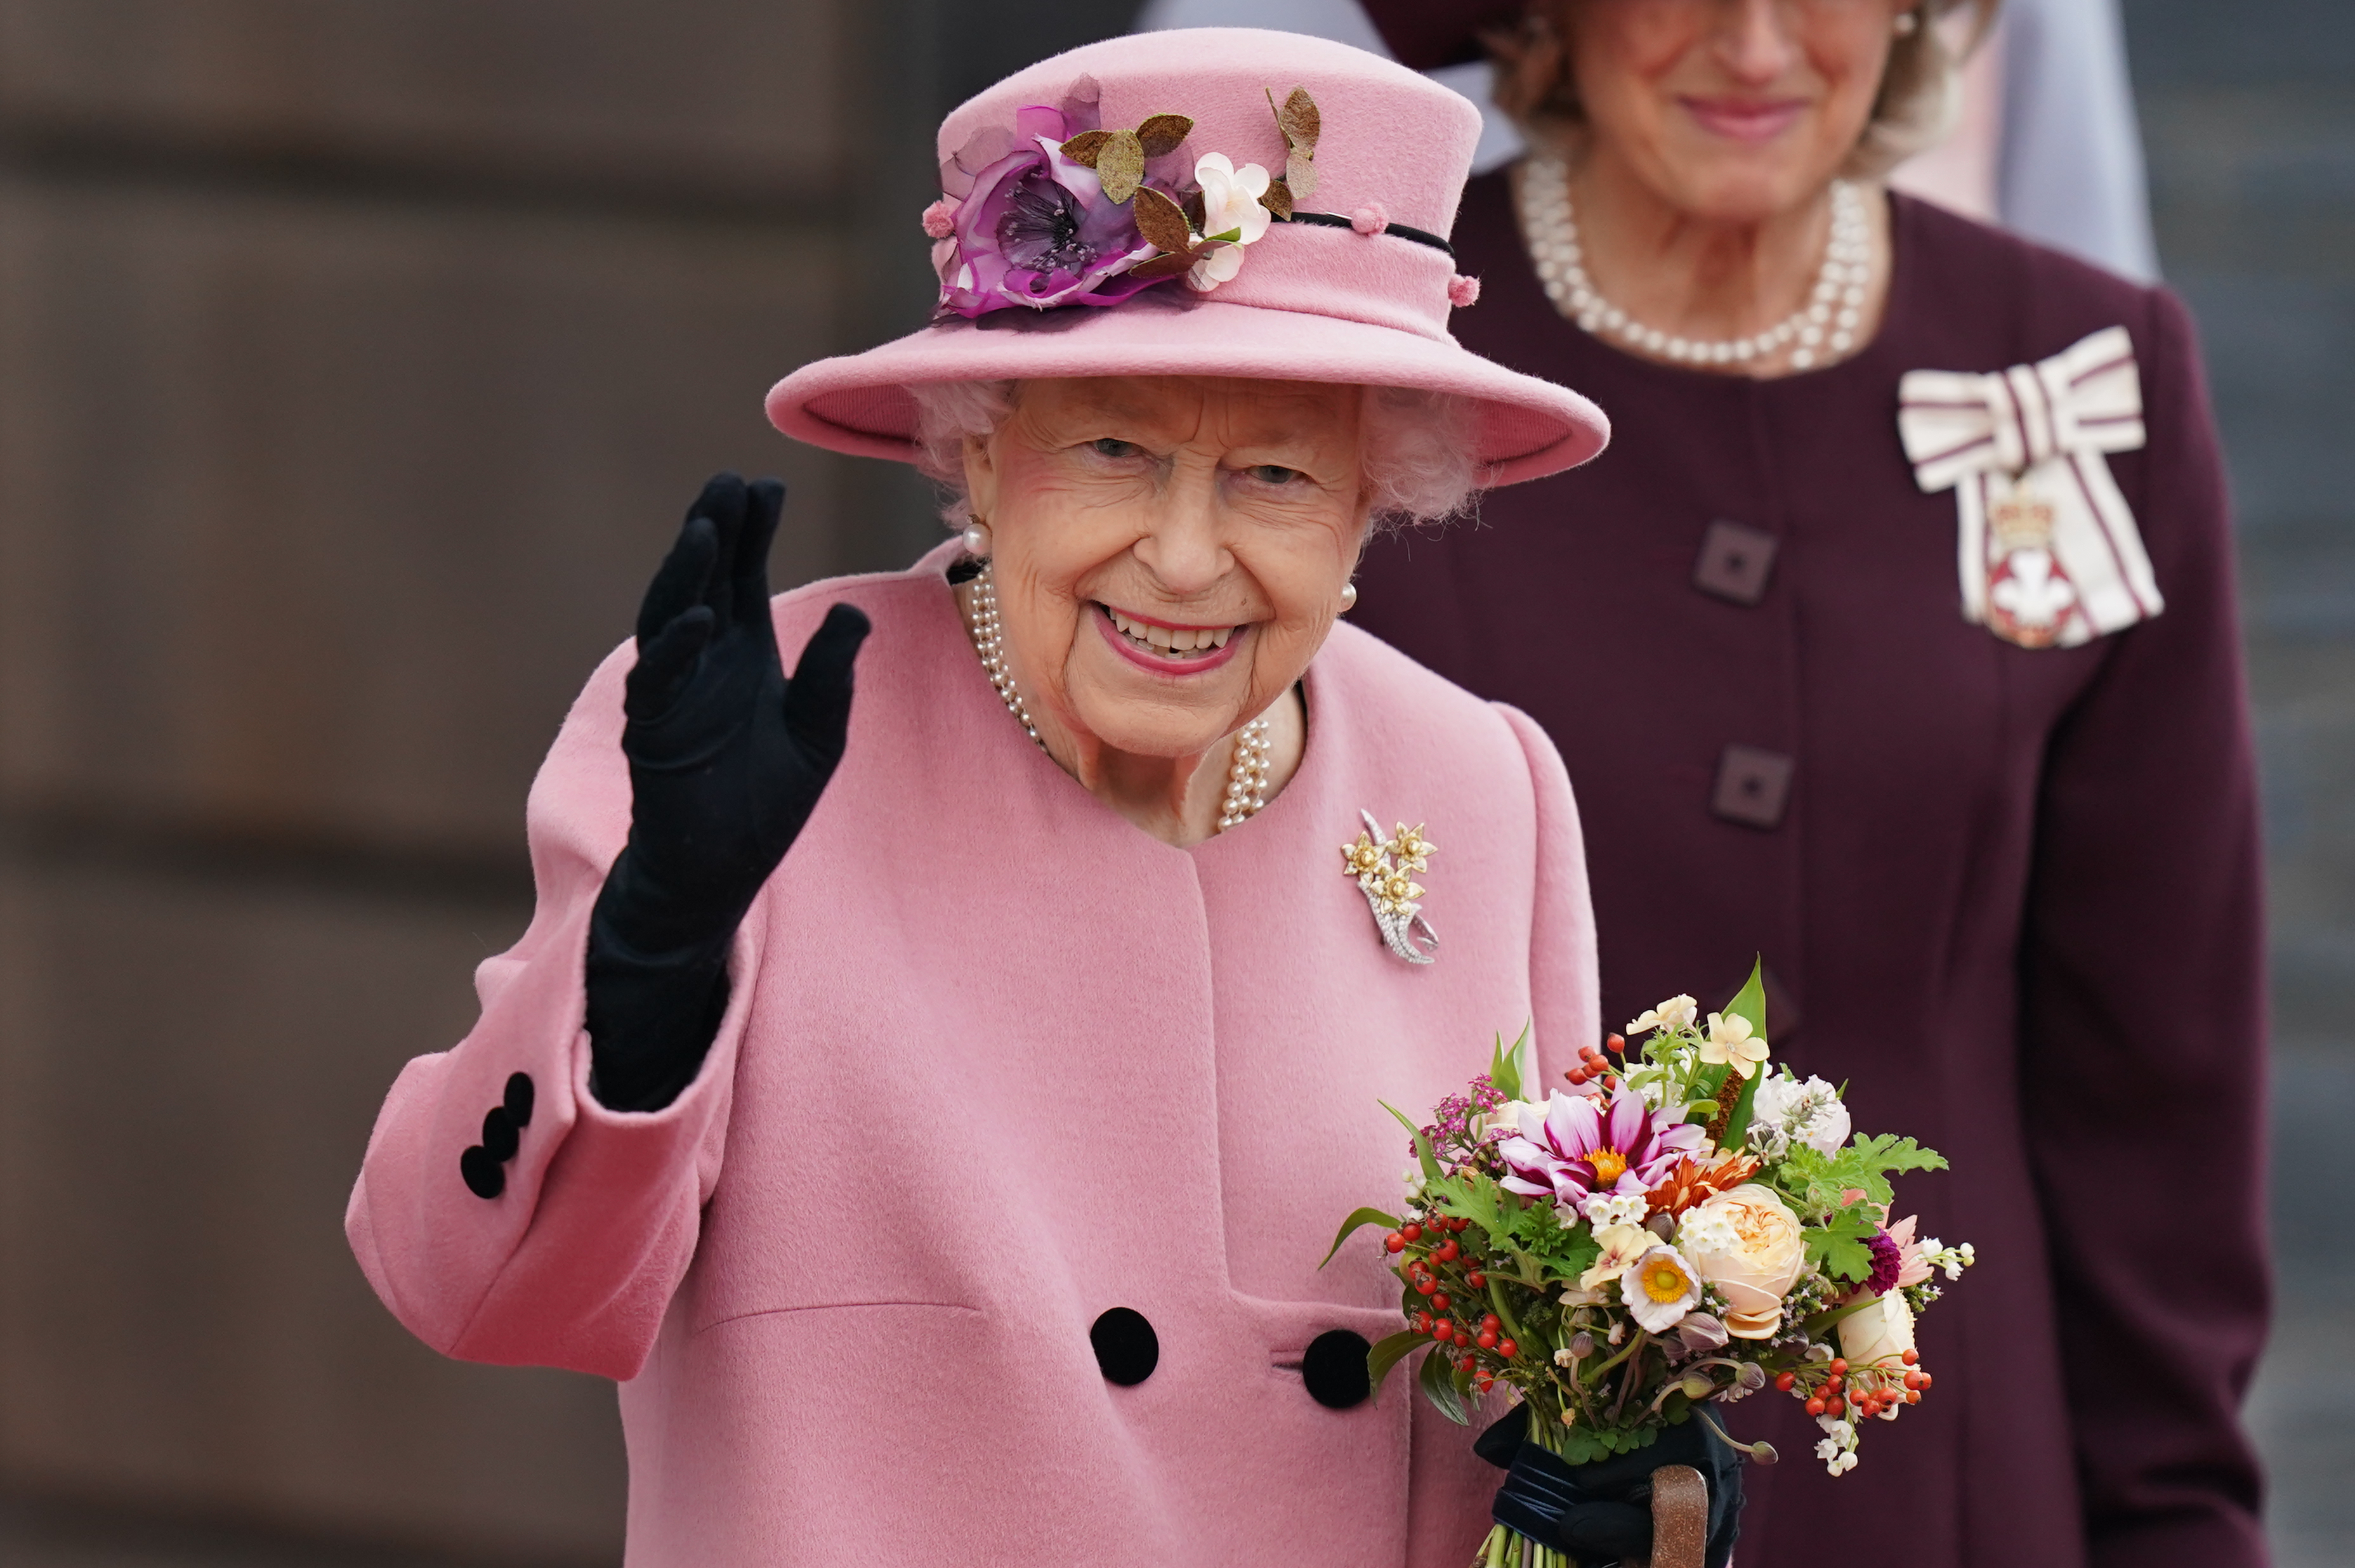 Official photo released to mark the occasion of Her Majesty The Queen's Platinum Jubilee​ June 2022​ Picture by Jacob King/PA Wire/PA Images